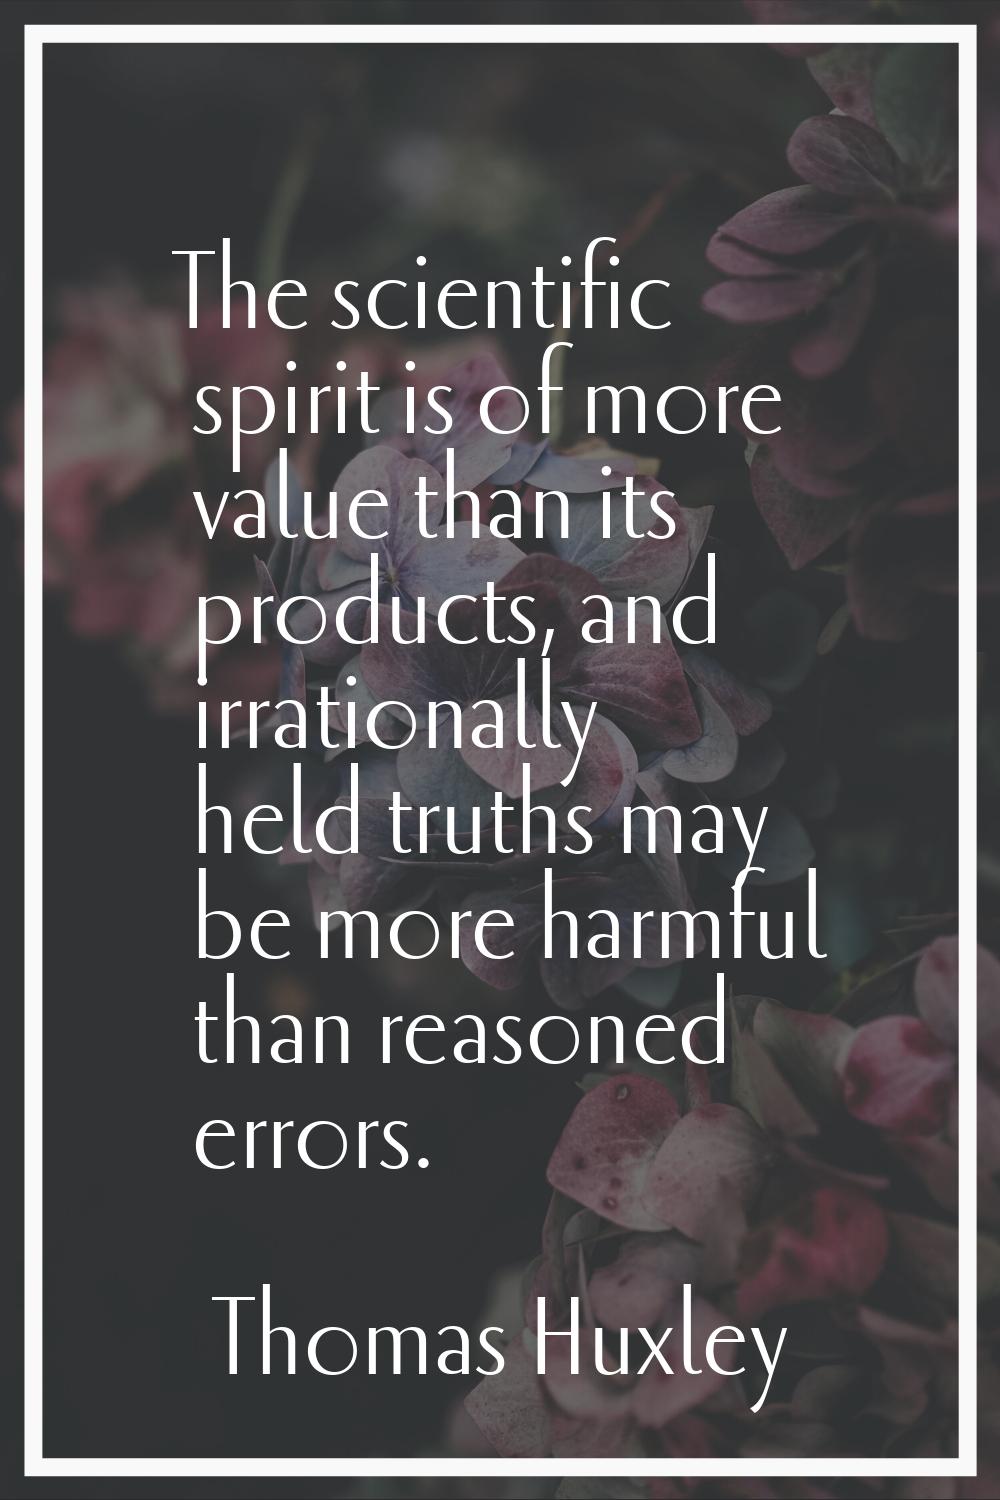 The scientific spirit is of more value than its products, and irrationally held truths may be more 